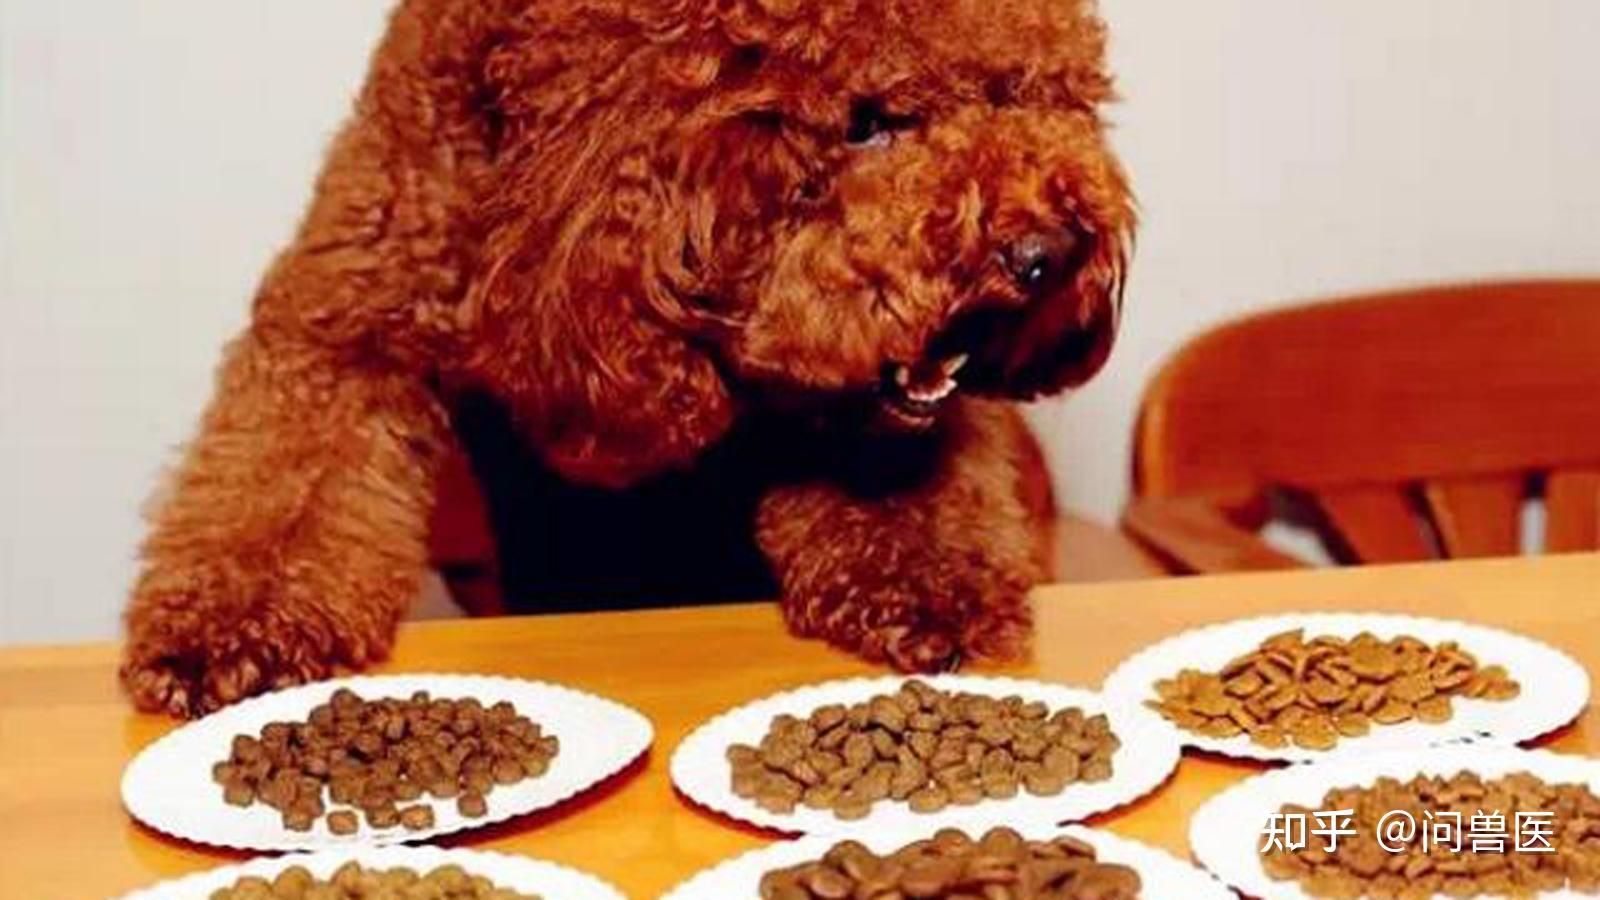 Feeding dogs (Adult Dogs-Small puppies)